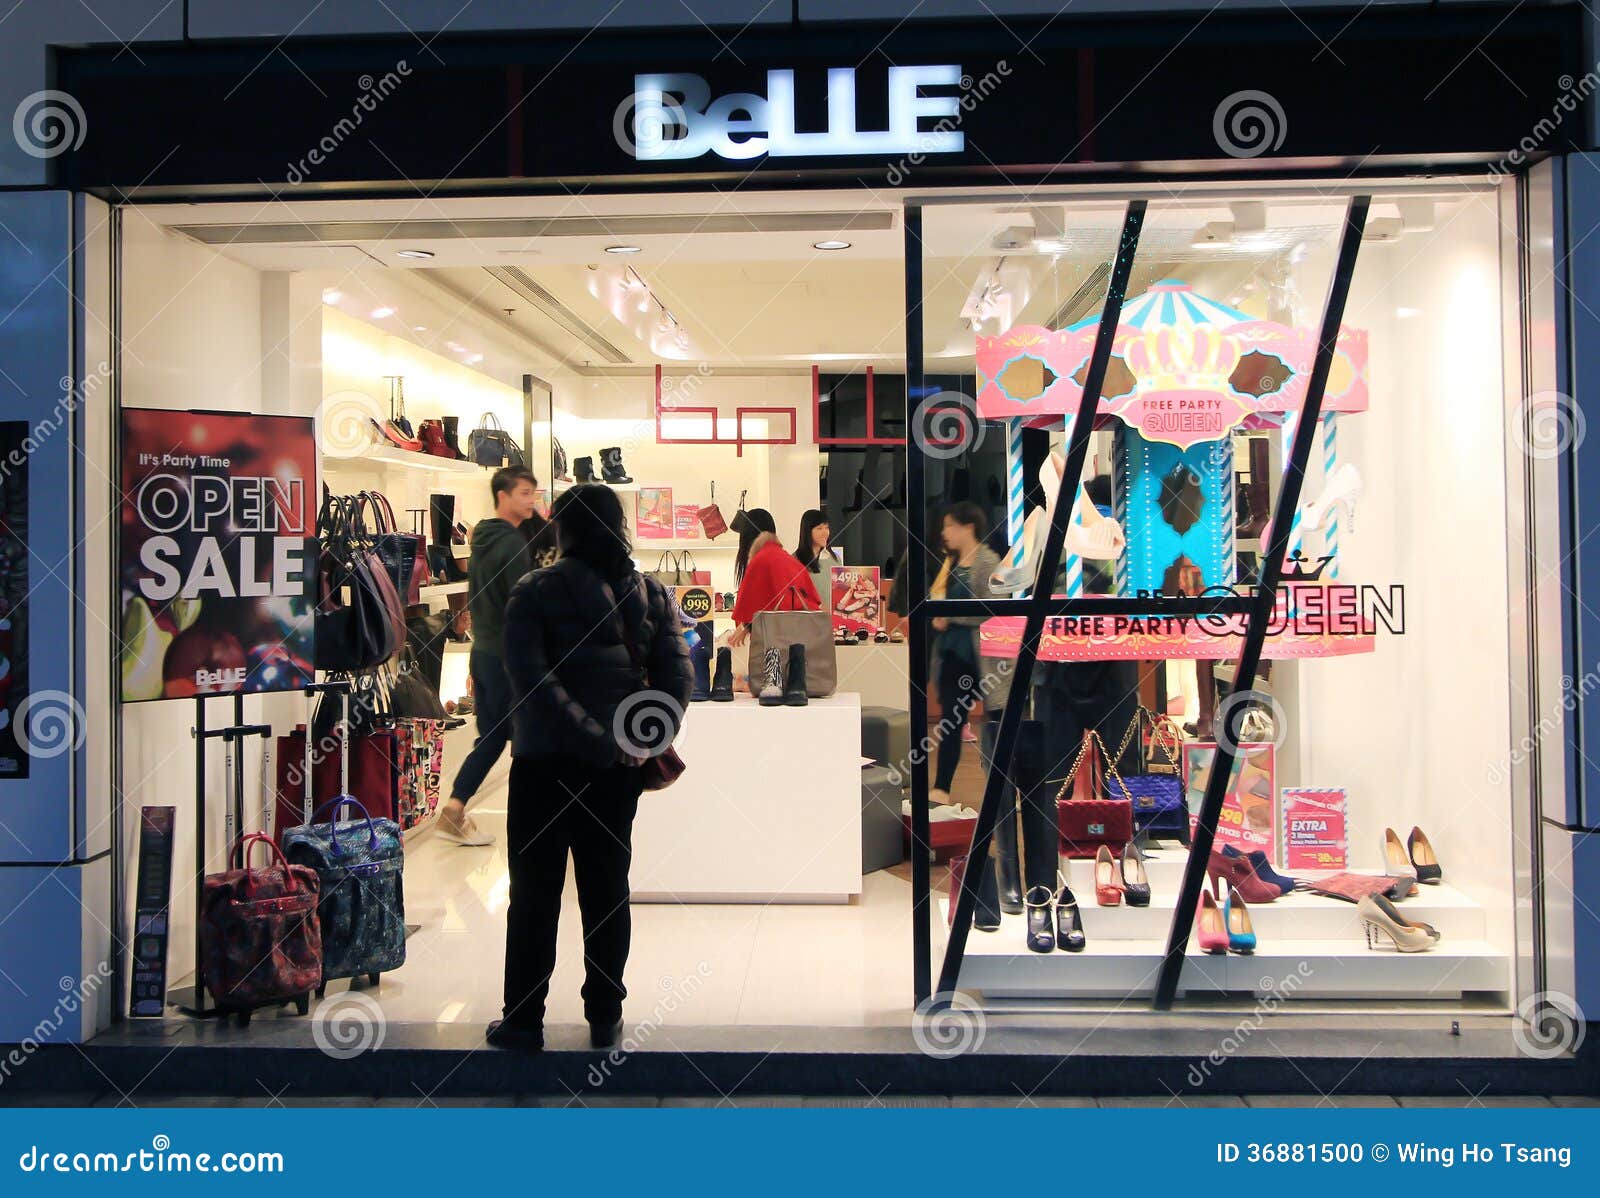 Belle shop in hong kong editorial image. Image of shopping - 36881500